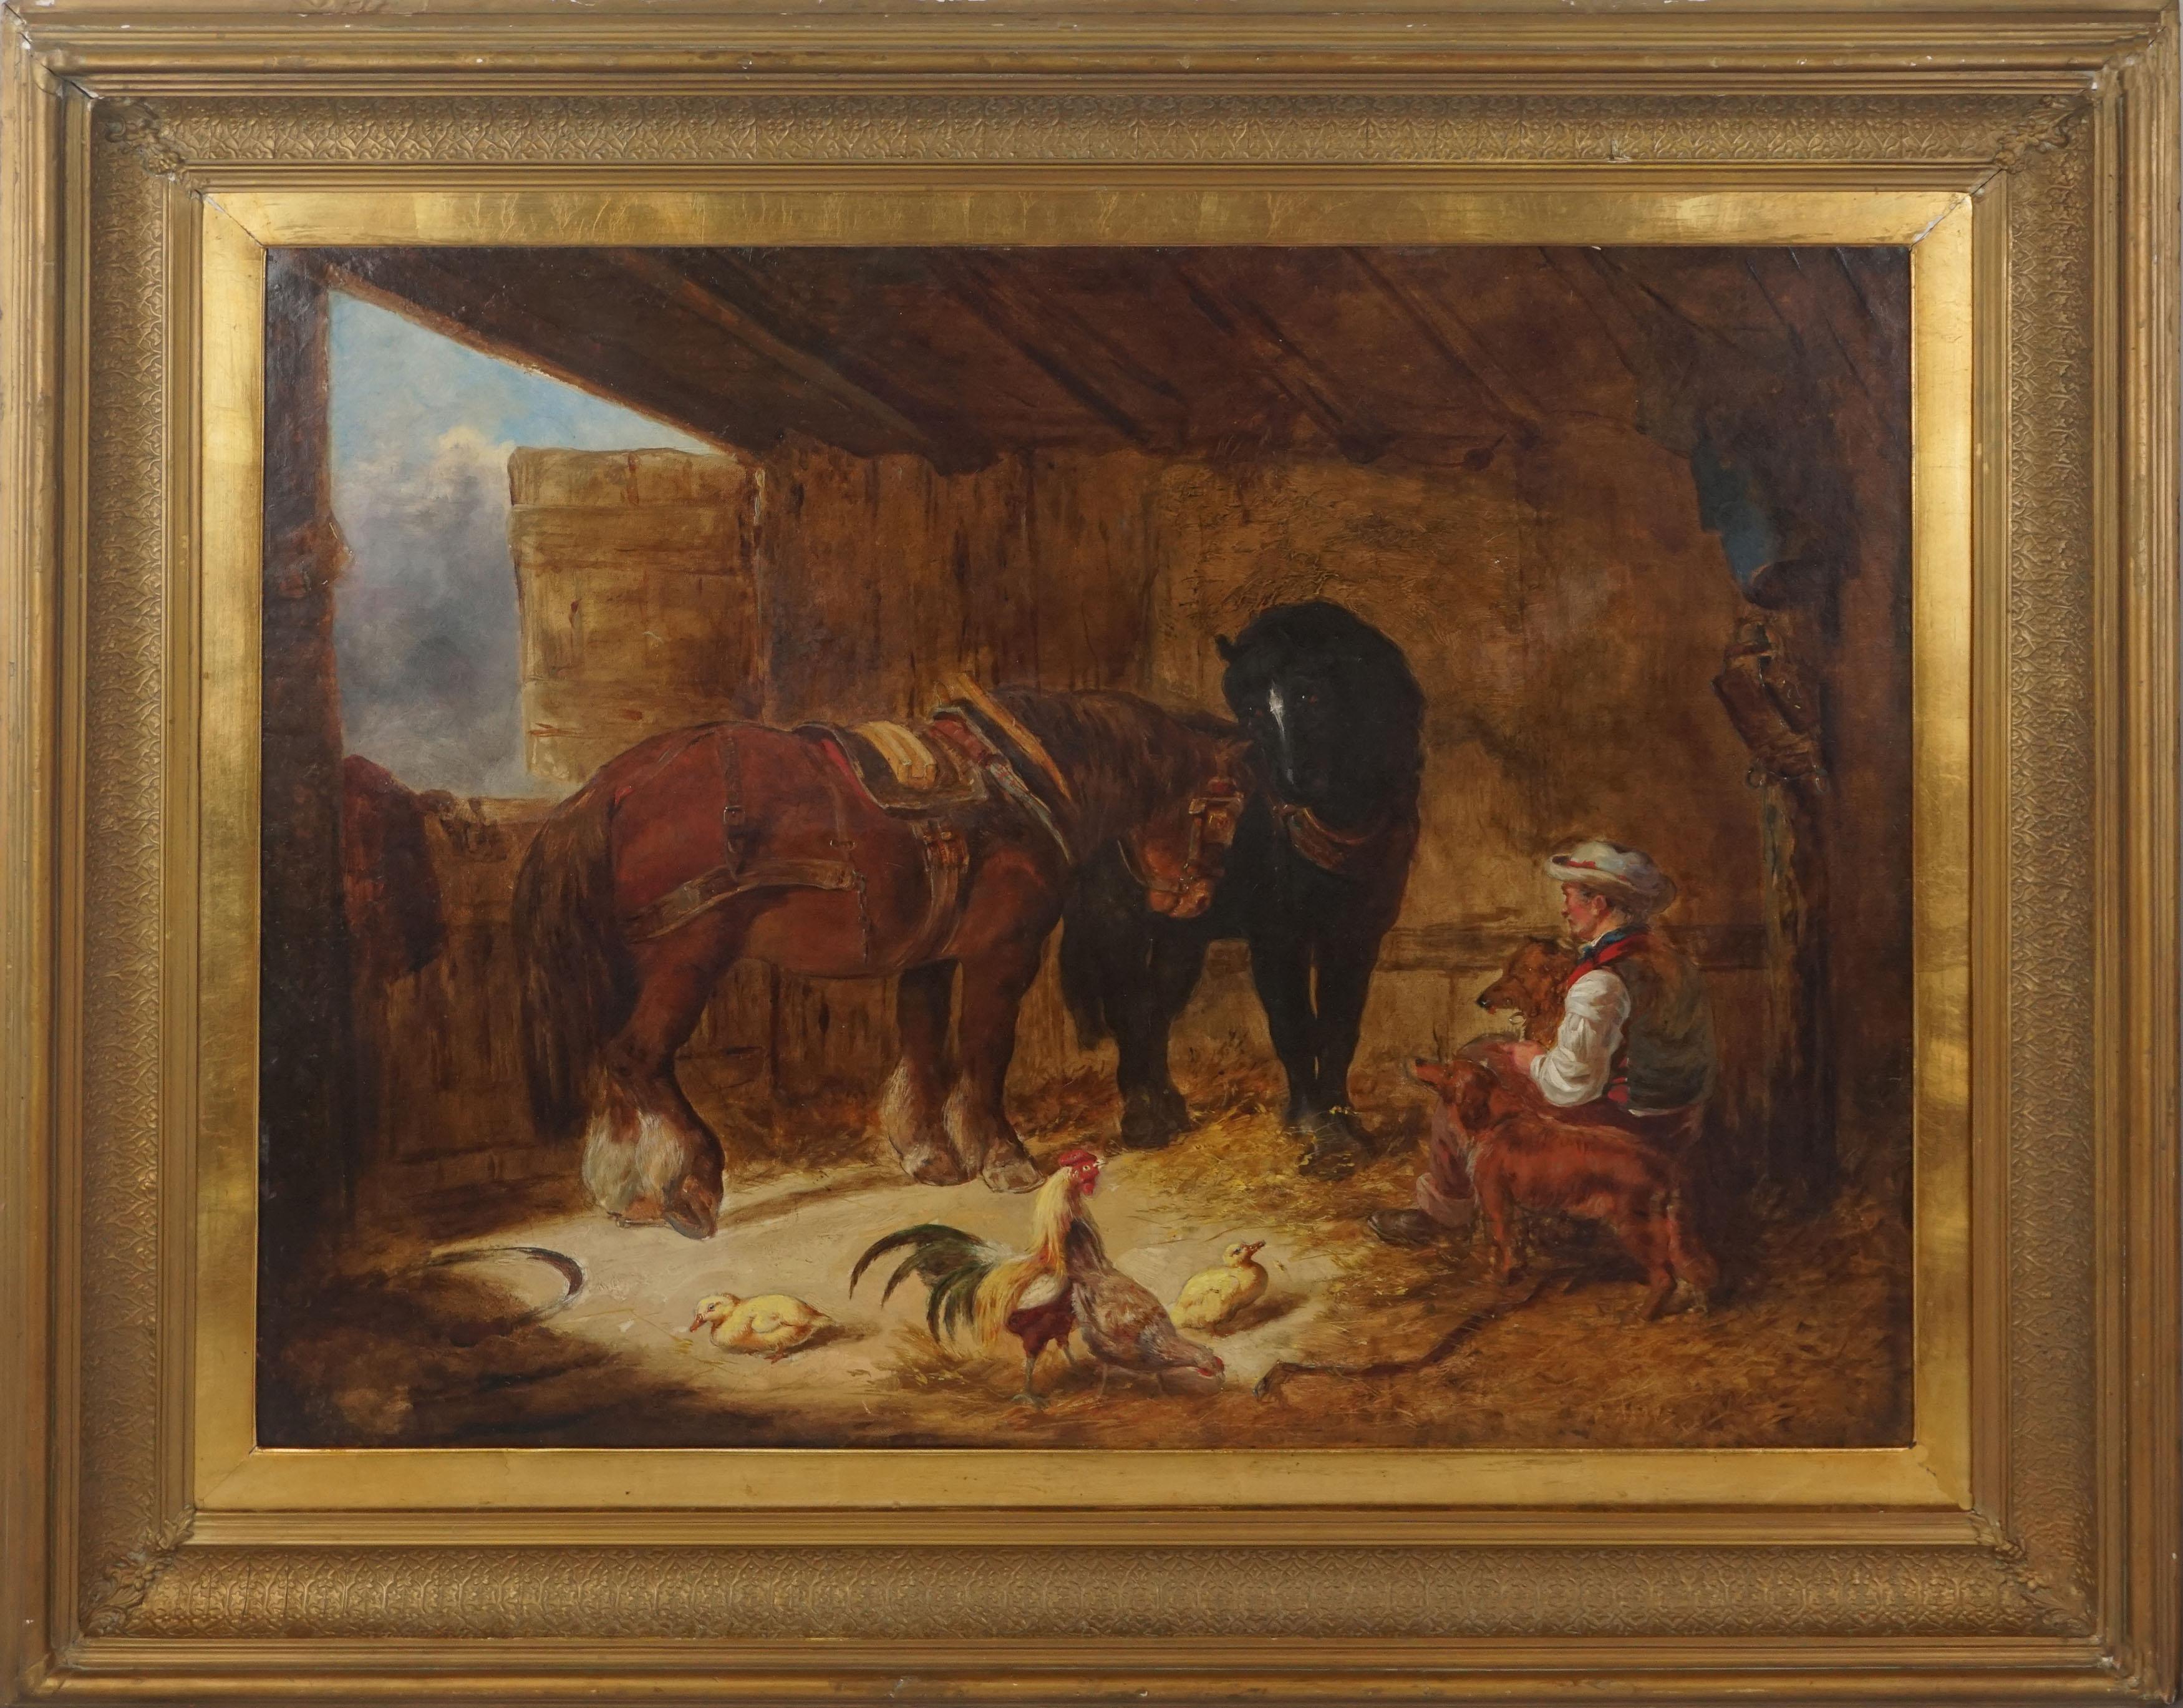 Unknown Figurative Painting - Mid 19th Century Interior of Stable with Horses, Dogs, and Stable Hand